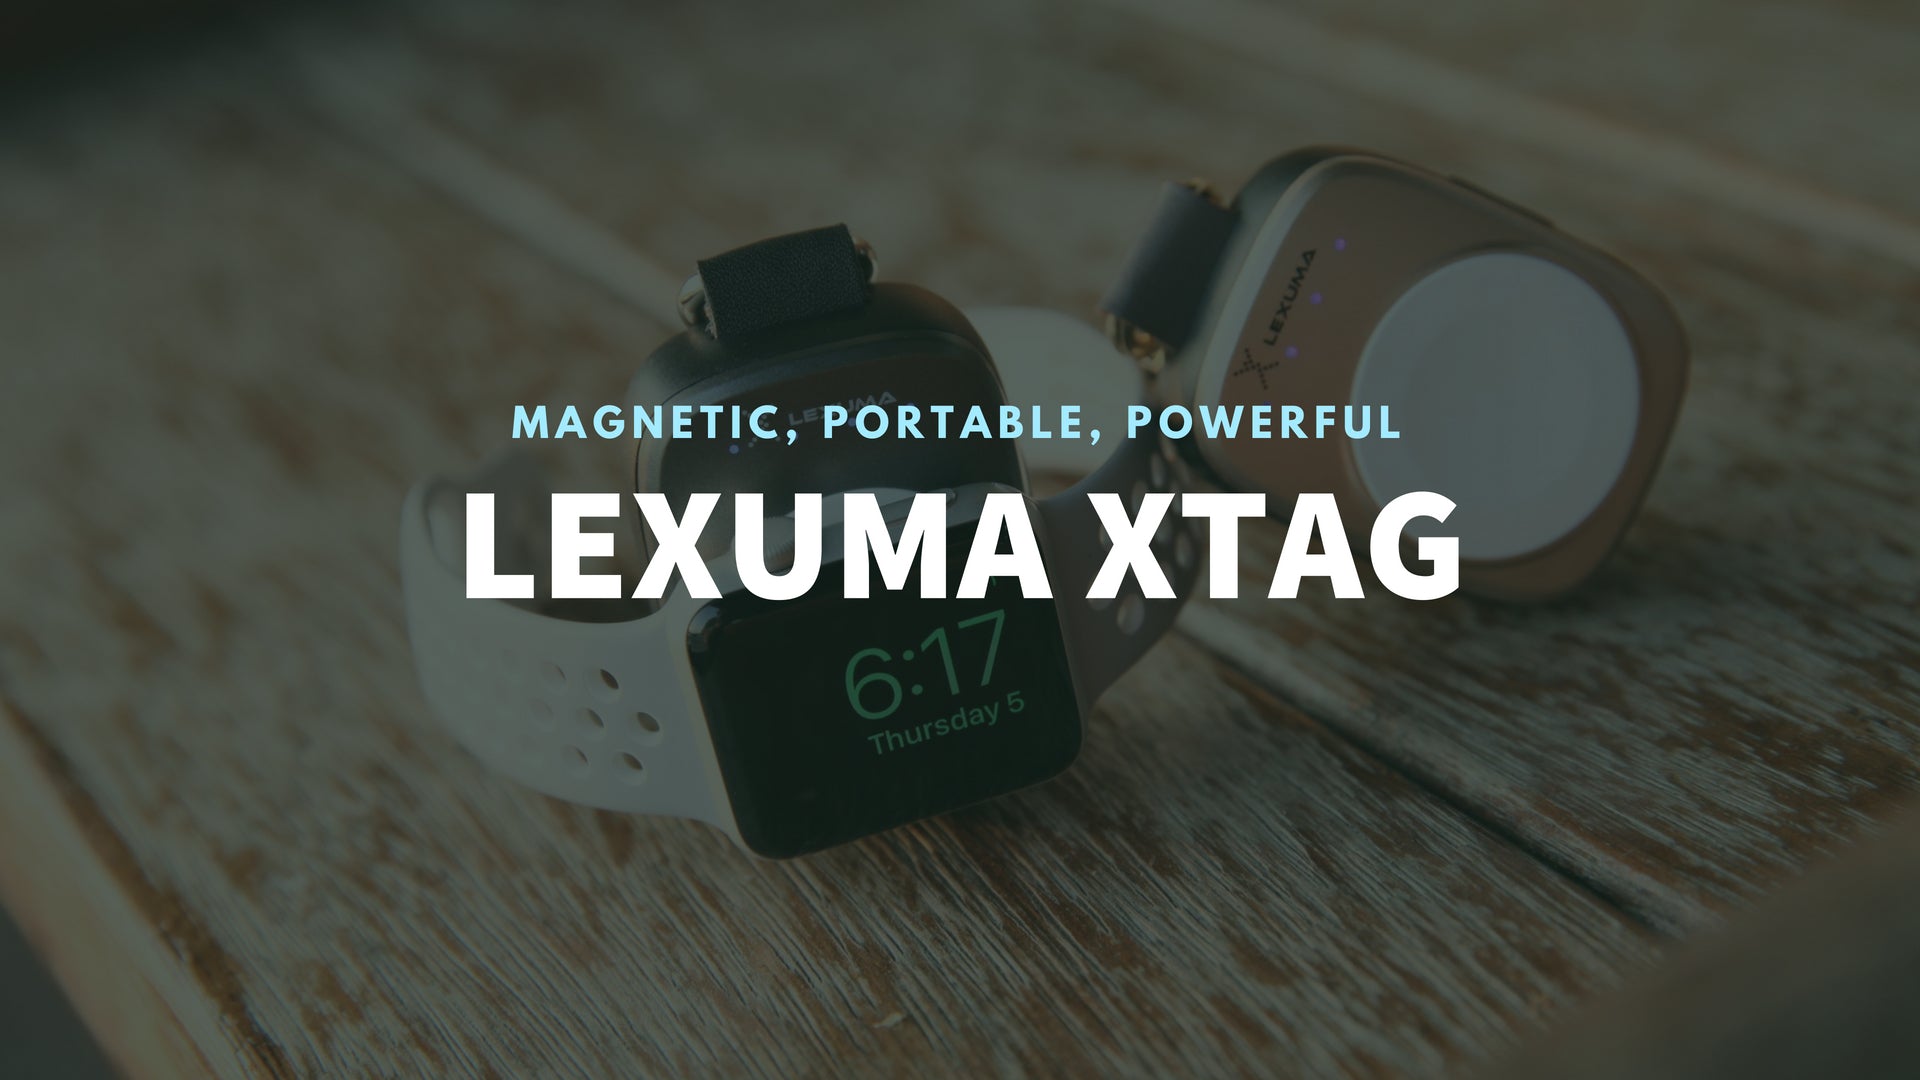 Lexuma XTag Apple Watch Portable Charger pantheon best portable mini keychain power bank case series 4 wireless charging belkin valet griffin amber charging case batterypro smashell power case mipow 2-in-1 keychain case capshi portable wireless charge best aftermarket charging case wireless charging case power bank portable adapter wireless mfi certified anker iwatch insignia charging stand target series 4 - iMartCity banner